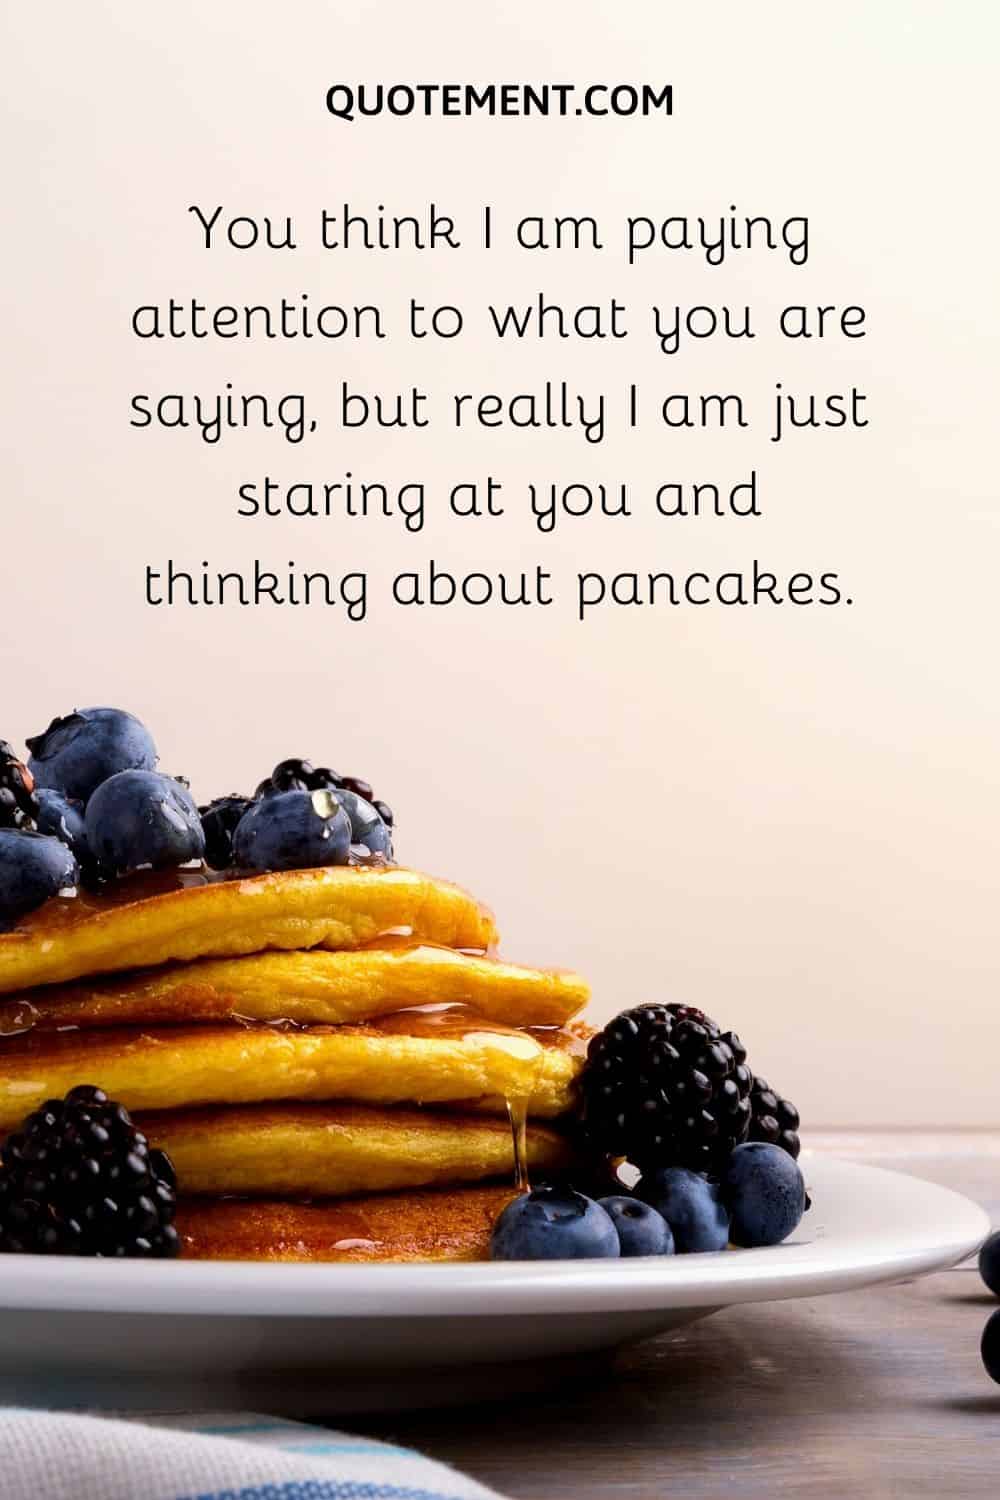 I am just staring at you and thinking about pancakes